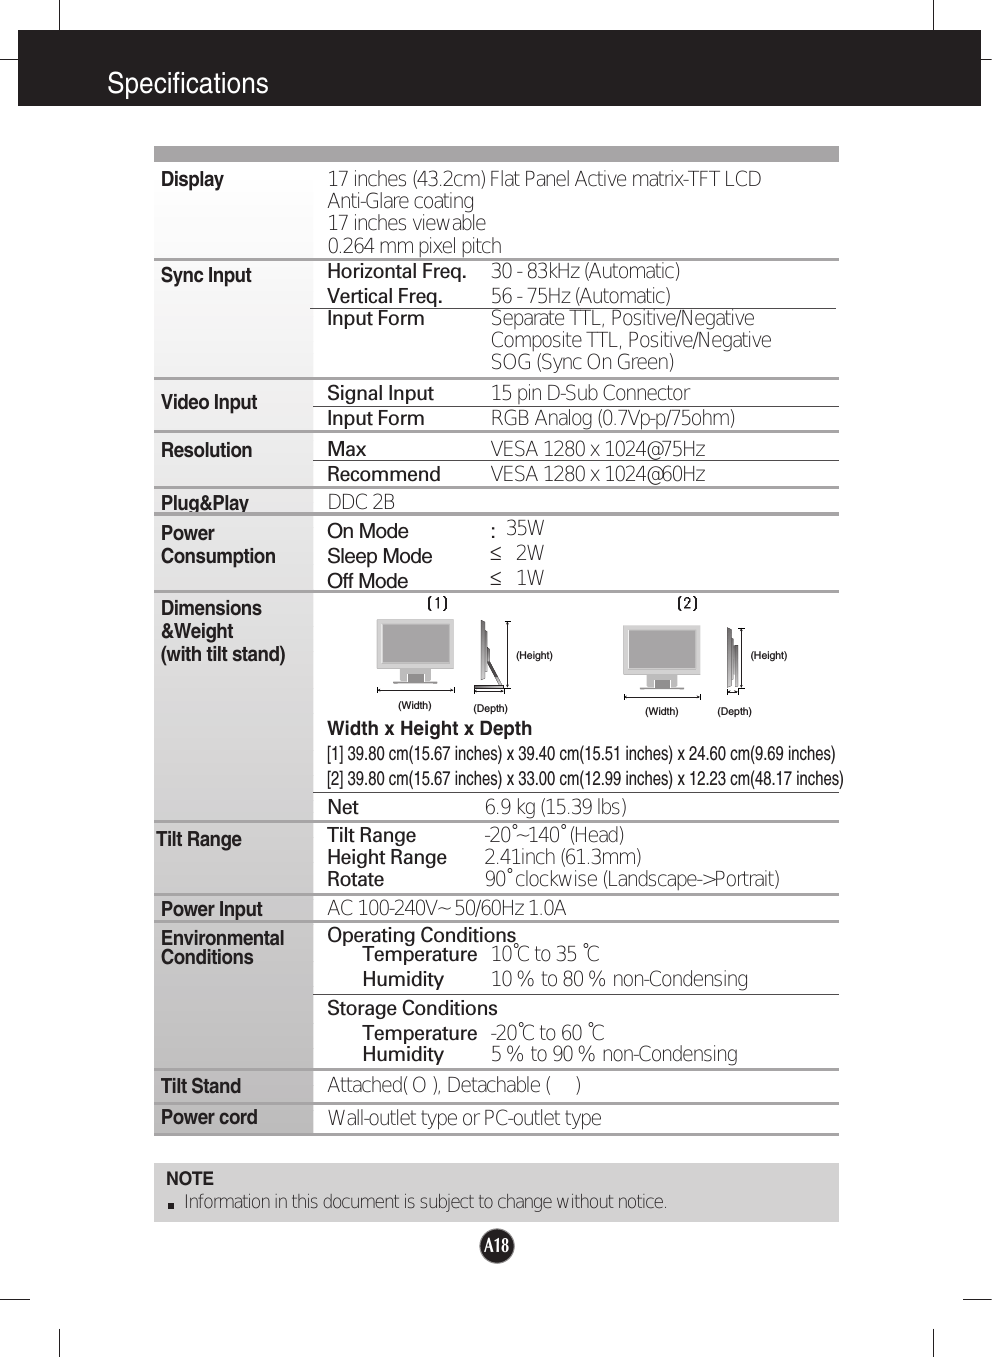 A18SpecificationsNOTEInformation in this document is subject to change without notice.17 inches (43.2cm) Flat Panel Active matrix-TFT LCD Anti-Glare coating17 inches viewable0.264 mm pixel pitchHorizontal Freq. 30 - 83kHz (Automatic)Vertical Freq. 56 - 75Hz (Automatic)Input Form Separate TTL, Positive/NegativeComposite TTL, Positive/NegativeSOG (Sync On Green) Signal Input 15 pin D-Sub ConnectorInput Form RGB Analog (0.7Vp-p/75ohm)Max VESA 1280 x 1024@75Hz Recommend VESA 1280 x 1024@60HzDDC 2BOn Mode :35WSleep Mode≤2WOff Mode≤1WWidth x Height x Depth[1] 39.80 cm(15.67 inches) x 39.40 cm(15.51 inches) x 24.60 cm(9.69 inches) [2] 39.80 cm(15.67 inches) x 33.00 cm(12.99 inches) x 12.23 cm(48.17 inches)Net 6.9 kg (15.39 lbs)Tilt Range -20˚~140˚ (Head)Height Range 2.41inch (61.3mm)Rotate 90˚ clockwise (Landscape-&gt;Portrait)AC 100-240V~ 50/60Hz 1.0AOperating ConditionsTemperature 10˚C to 35 ˚CHumidity 10 % to 80 % non-CondensingStorage ConditionsTemperature -20˚C to 60 ˚CHumidity 5 % to 90 % non-CondensingAttached( O ), Detachable (     )Wall-outlet type or PC-outlet typeDisplaySync InputVideo InputResolutionPlug&amp;PlayPower   ConsumptionDimensions&amp;Weight(with tilt stand)Tilt RangePower InputEnvironmental ConditionsTilt StandPower cord (Width) (Depth)(Height)(Width) (Depth)(Height)